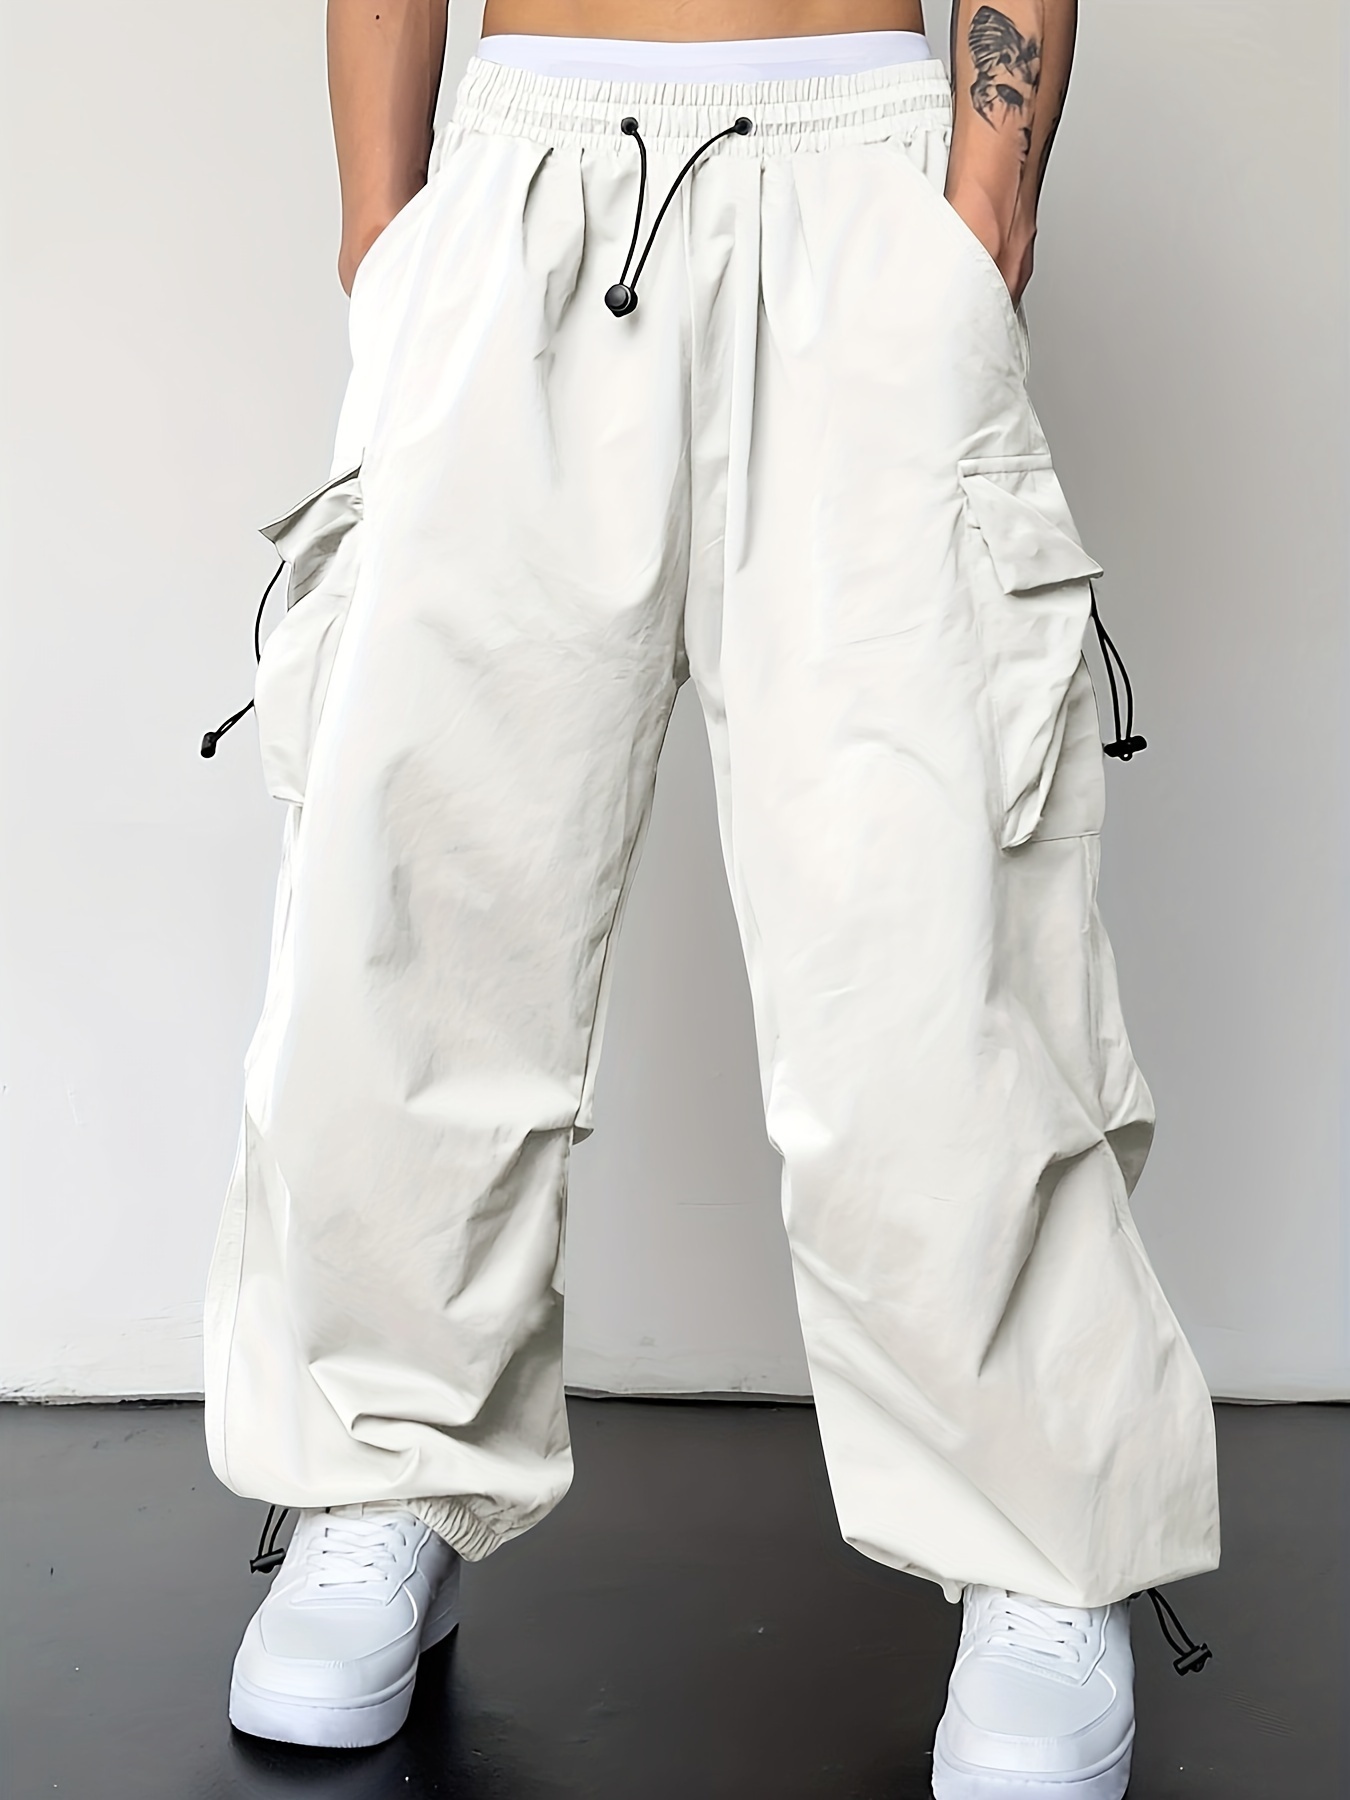 Mens Cargo Pants Work Pants Relaxed Fit Elastic Waist Casual Pants